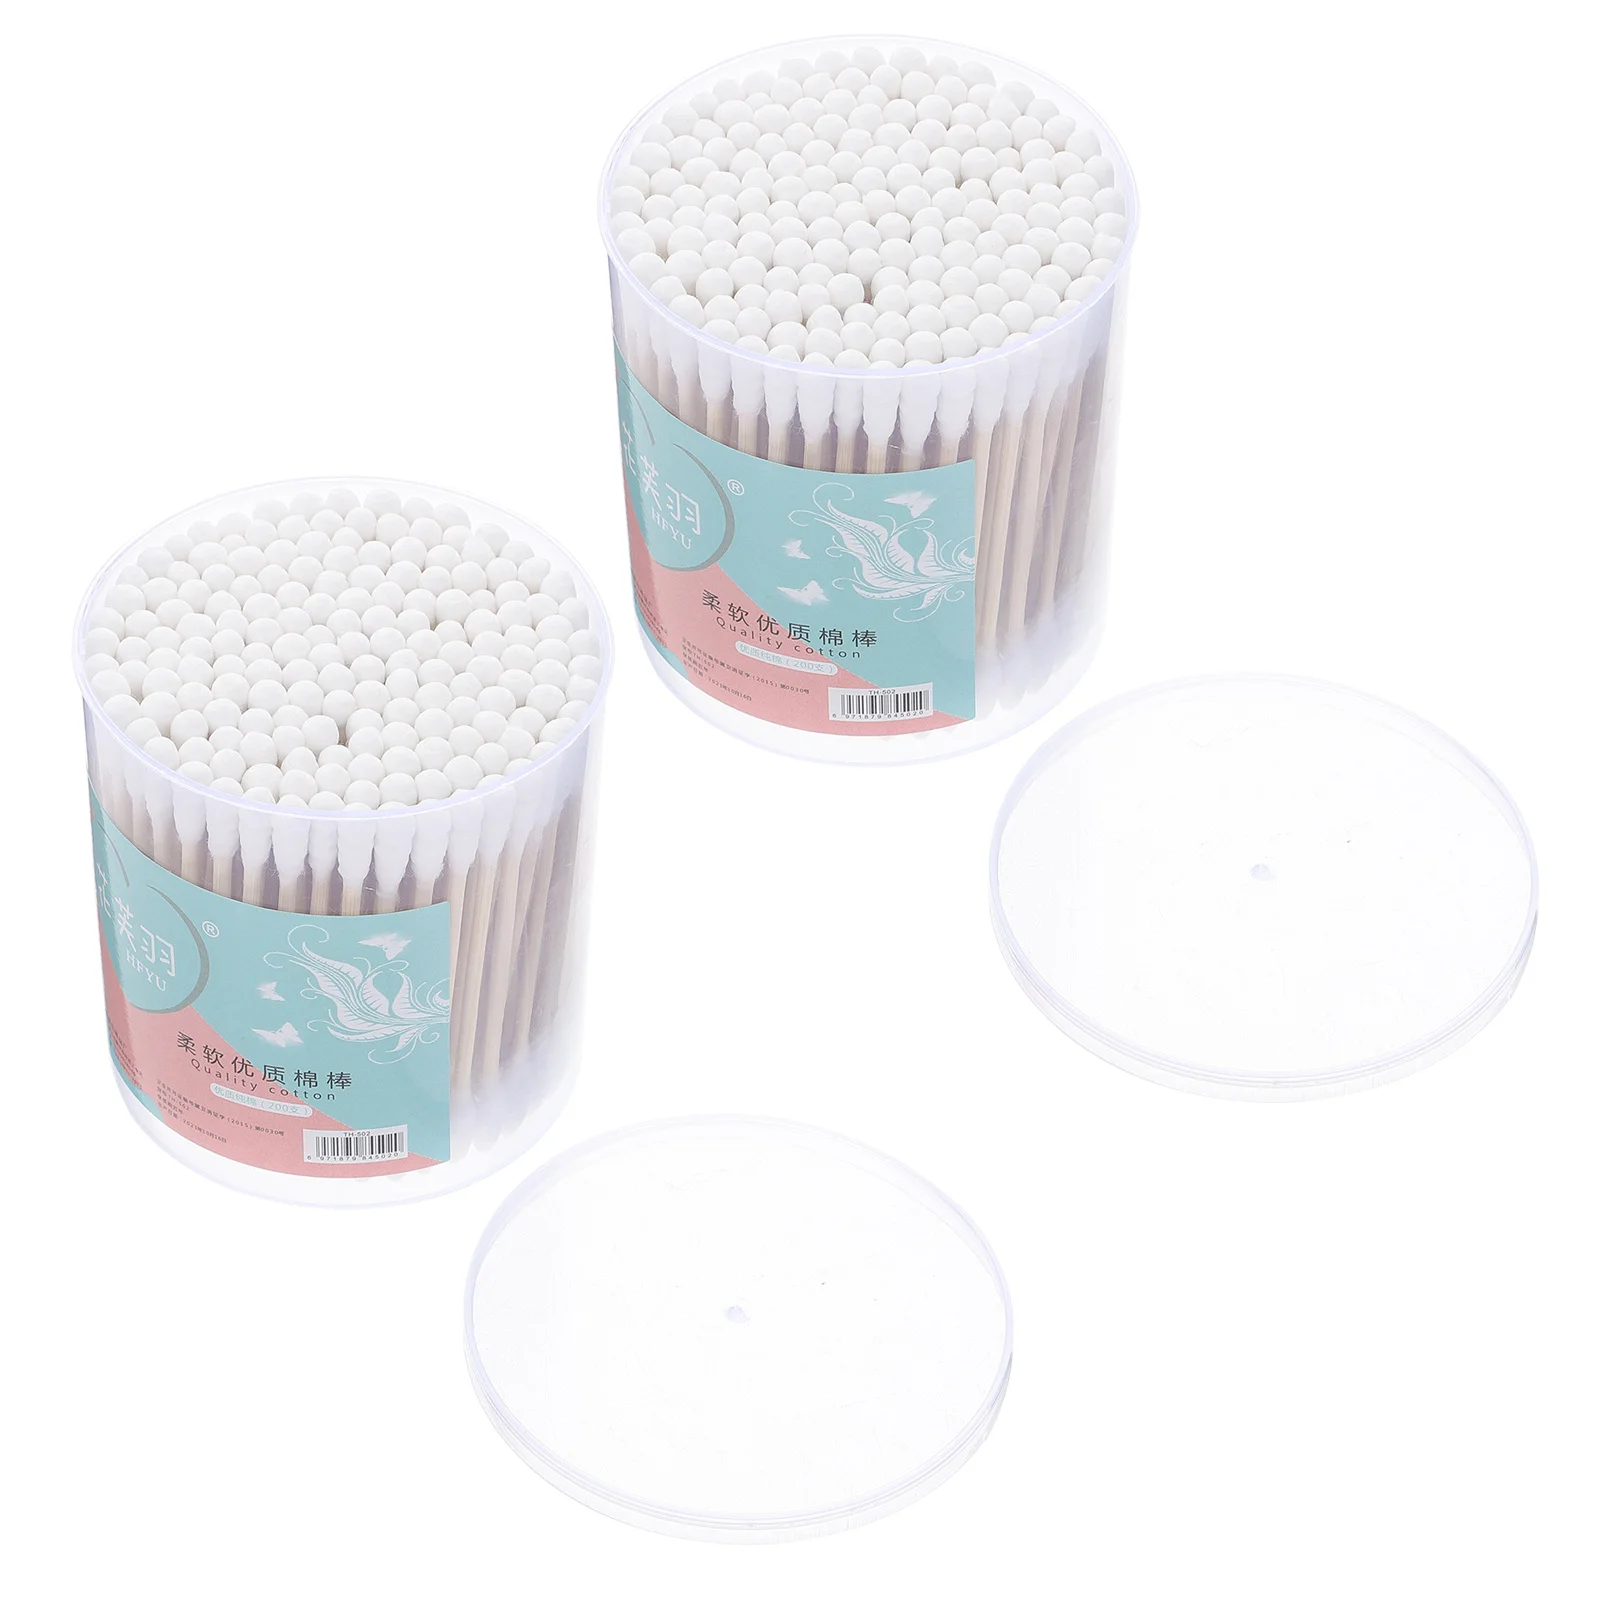 Baby Cotton Swabs 2 Box 400Pcs Baby Safety Swabs Double Spiral Tips Cotton Swabs Paper Sticks Natural Cotton Buds Ear 400pcs 2 boxes infant nose swabs paper sticks cotton buds baby care buds swabs ear nose cotton swabs infant cleaning sticks